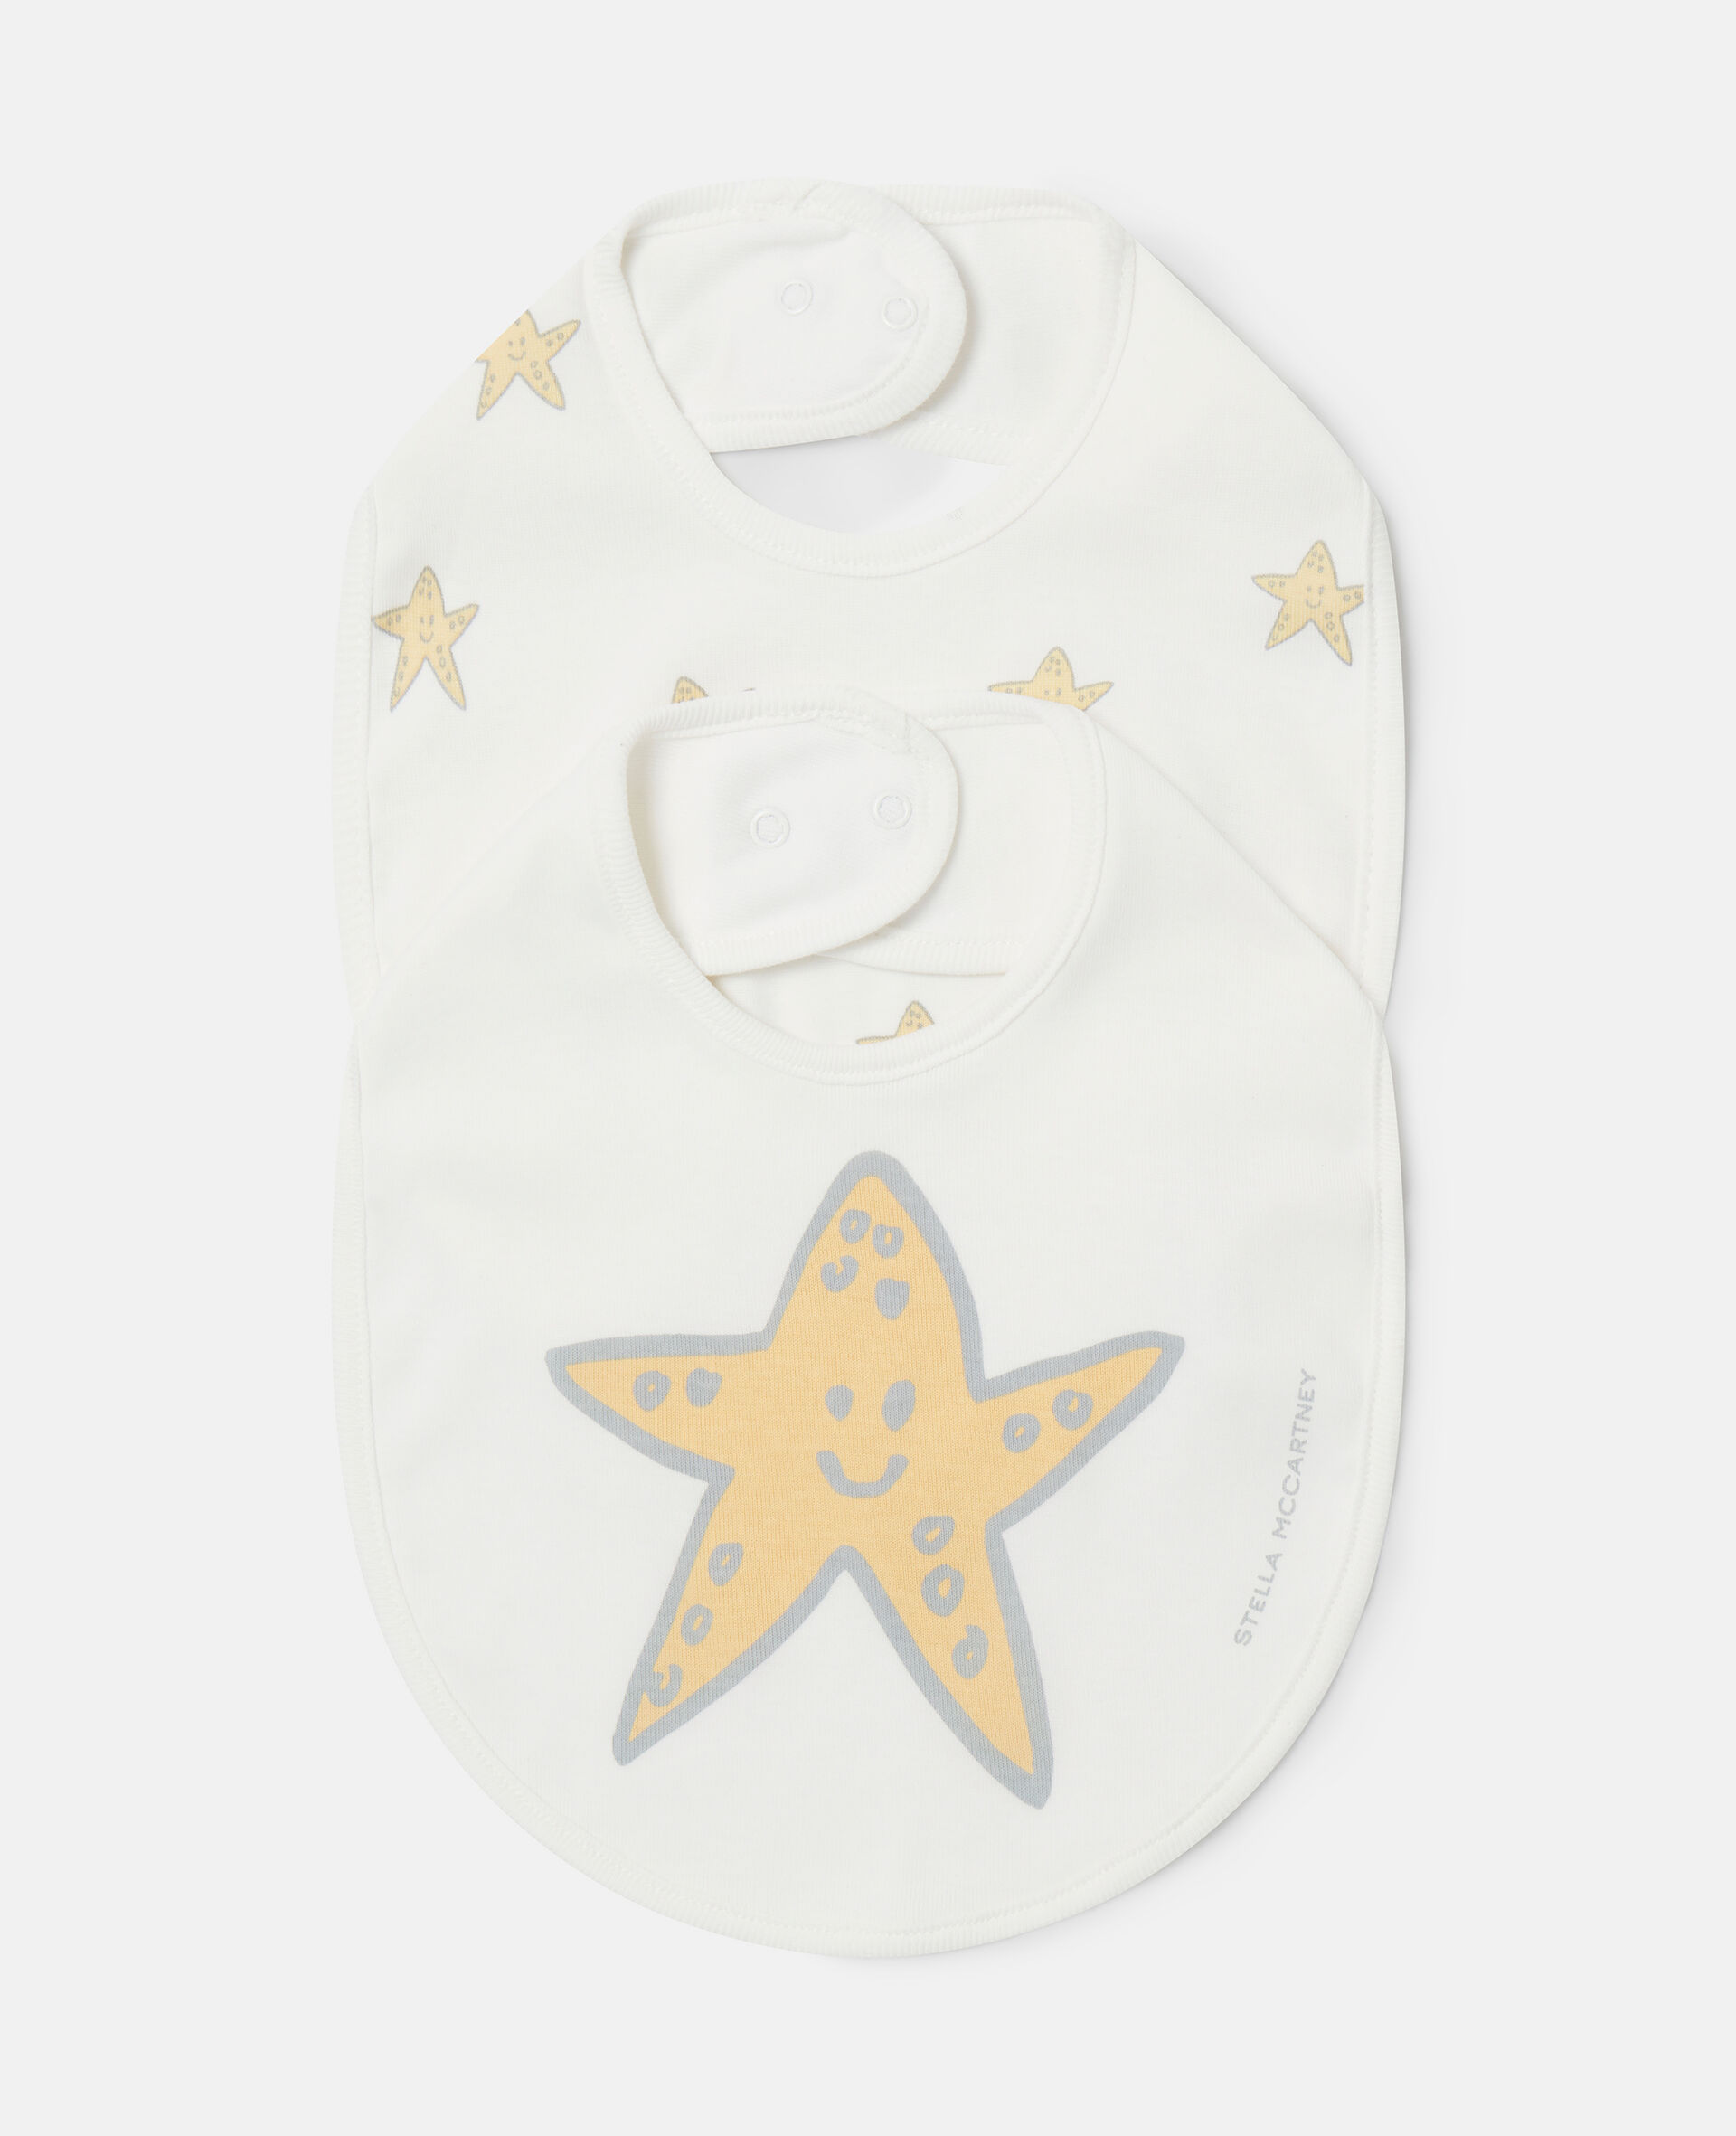 4 Pack of Smiling Stella Star Print Bibs-Multicolour-large image number 0